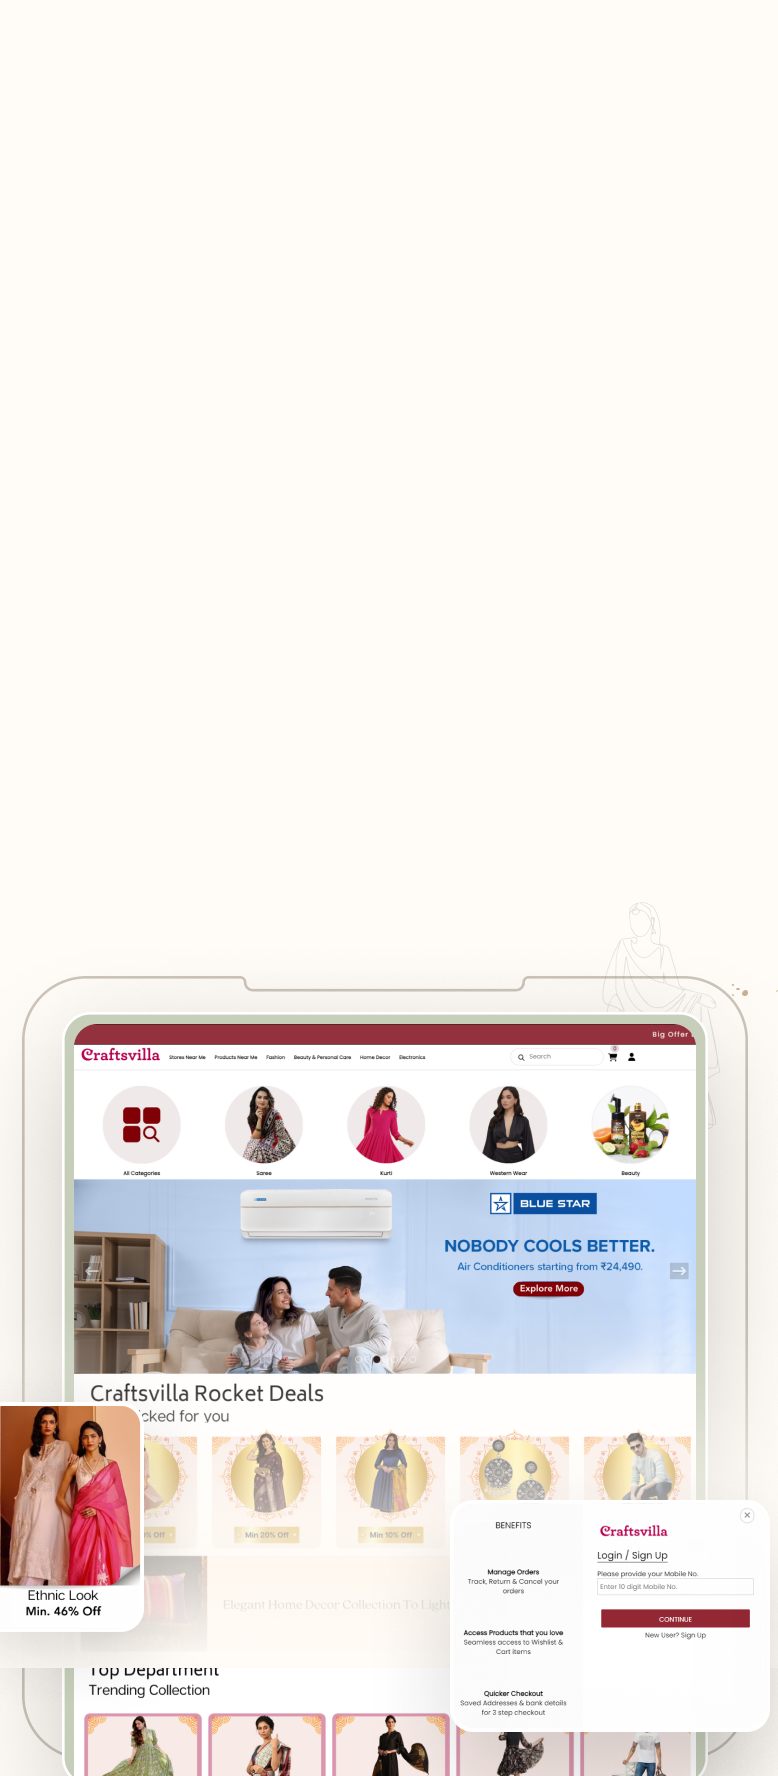 Streamlining Operations for a Fashion Store with 2M+ Products and 10k+ of Vendors